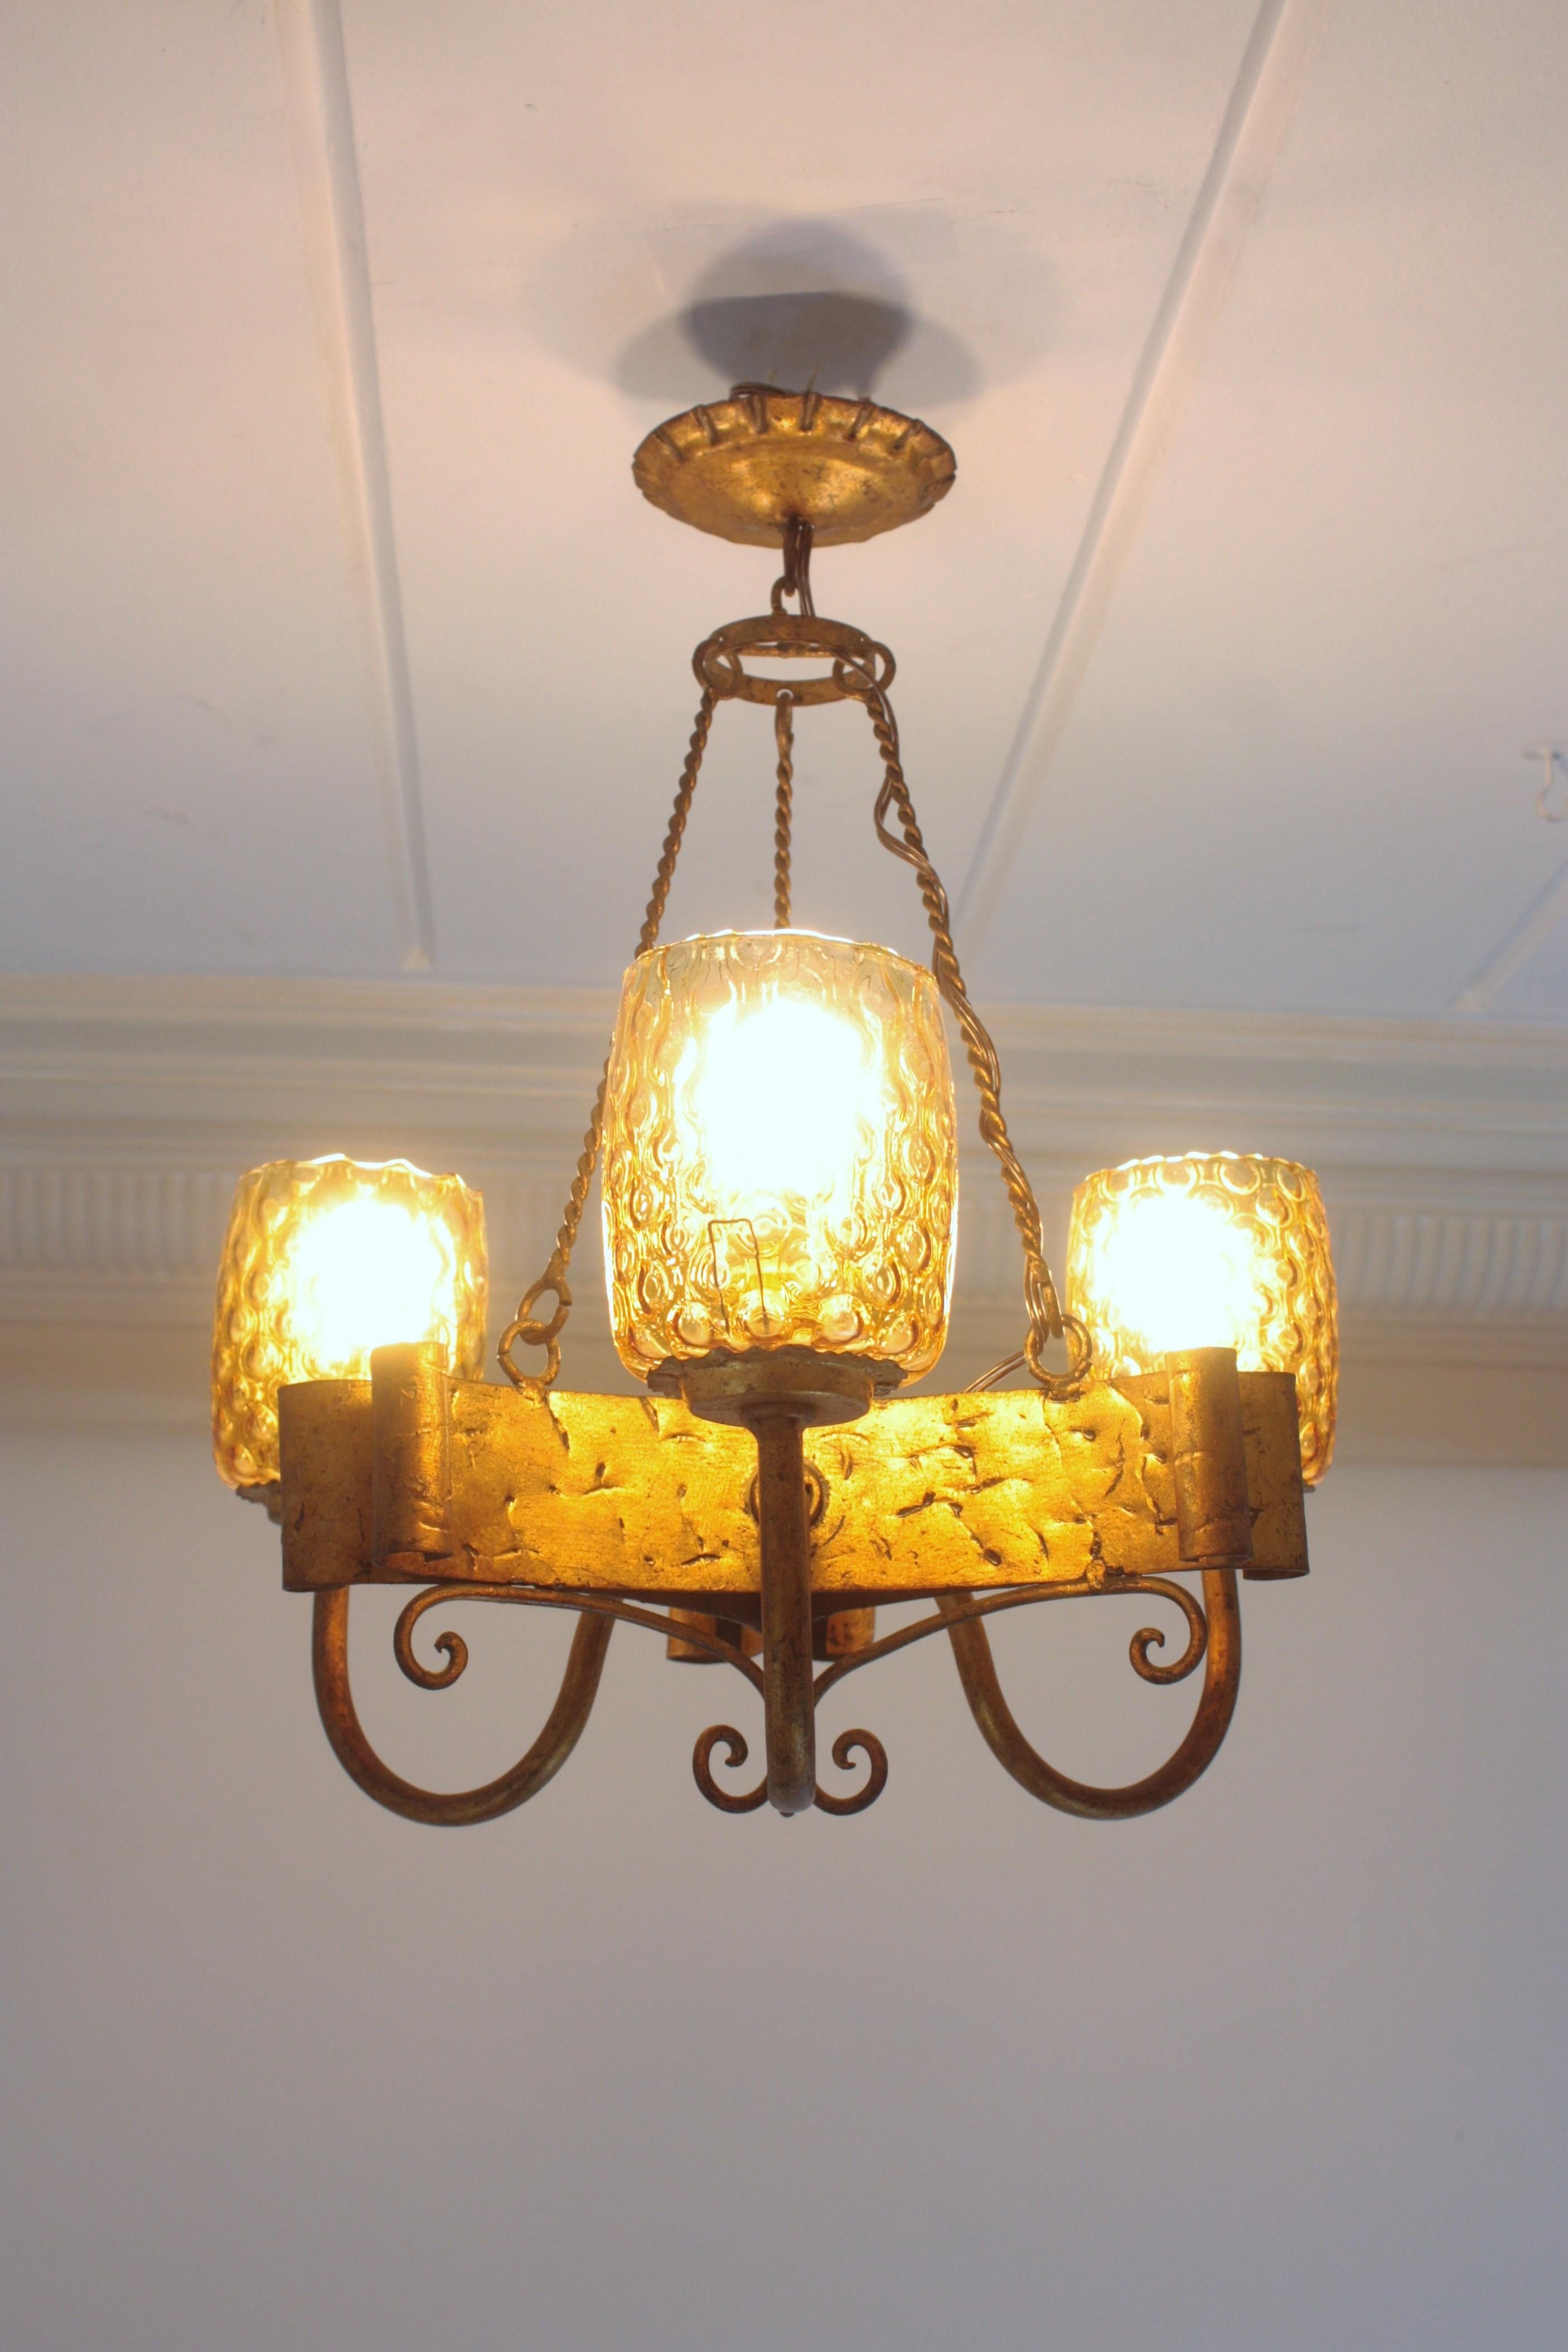 Spanish Colonial Spanish Gothic Style Chandelier with Amber Glass Shades, Gilt Wrought Iron For Sale